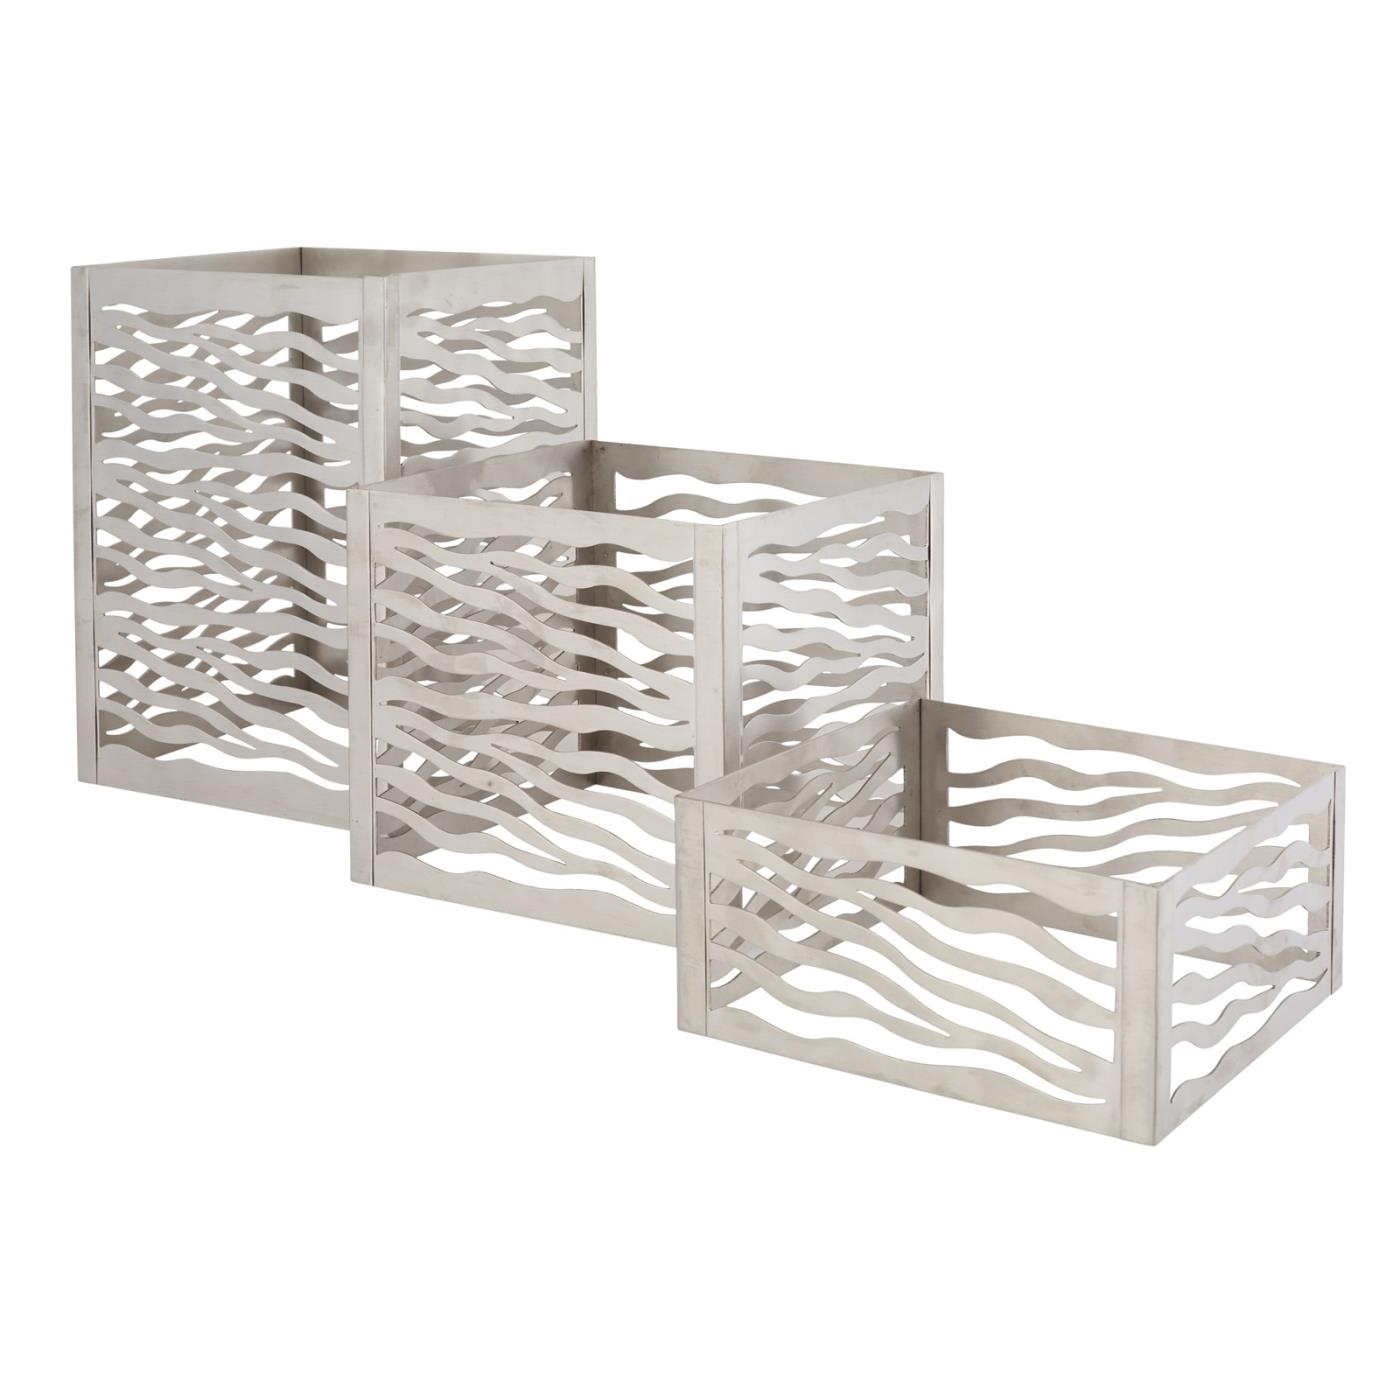 Risers Sets - Stainless Steel Square Wavy